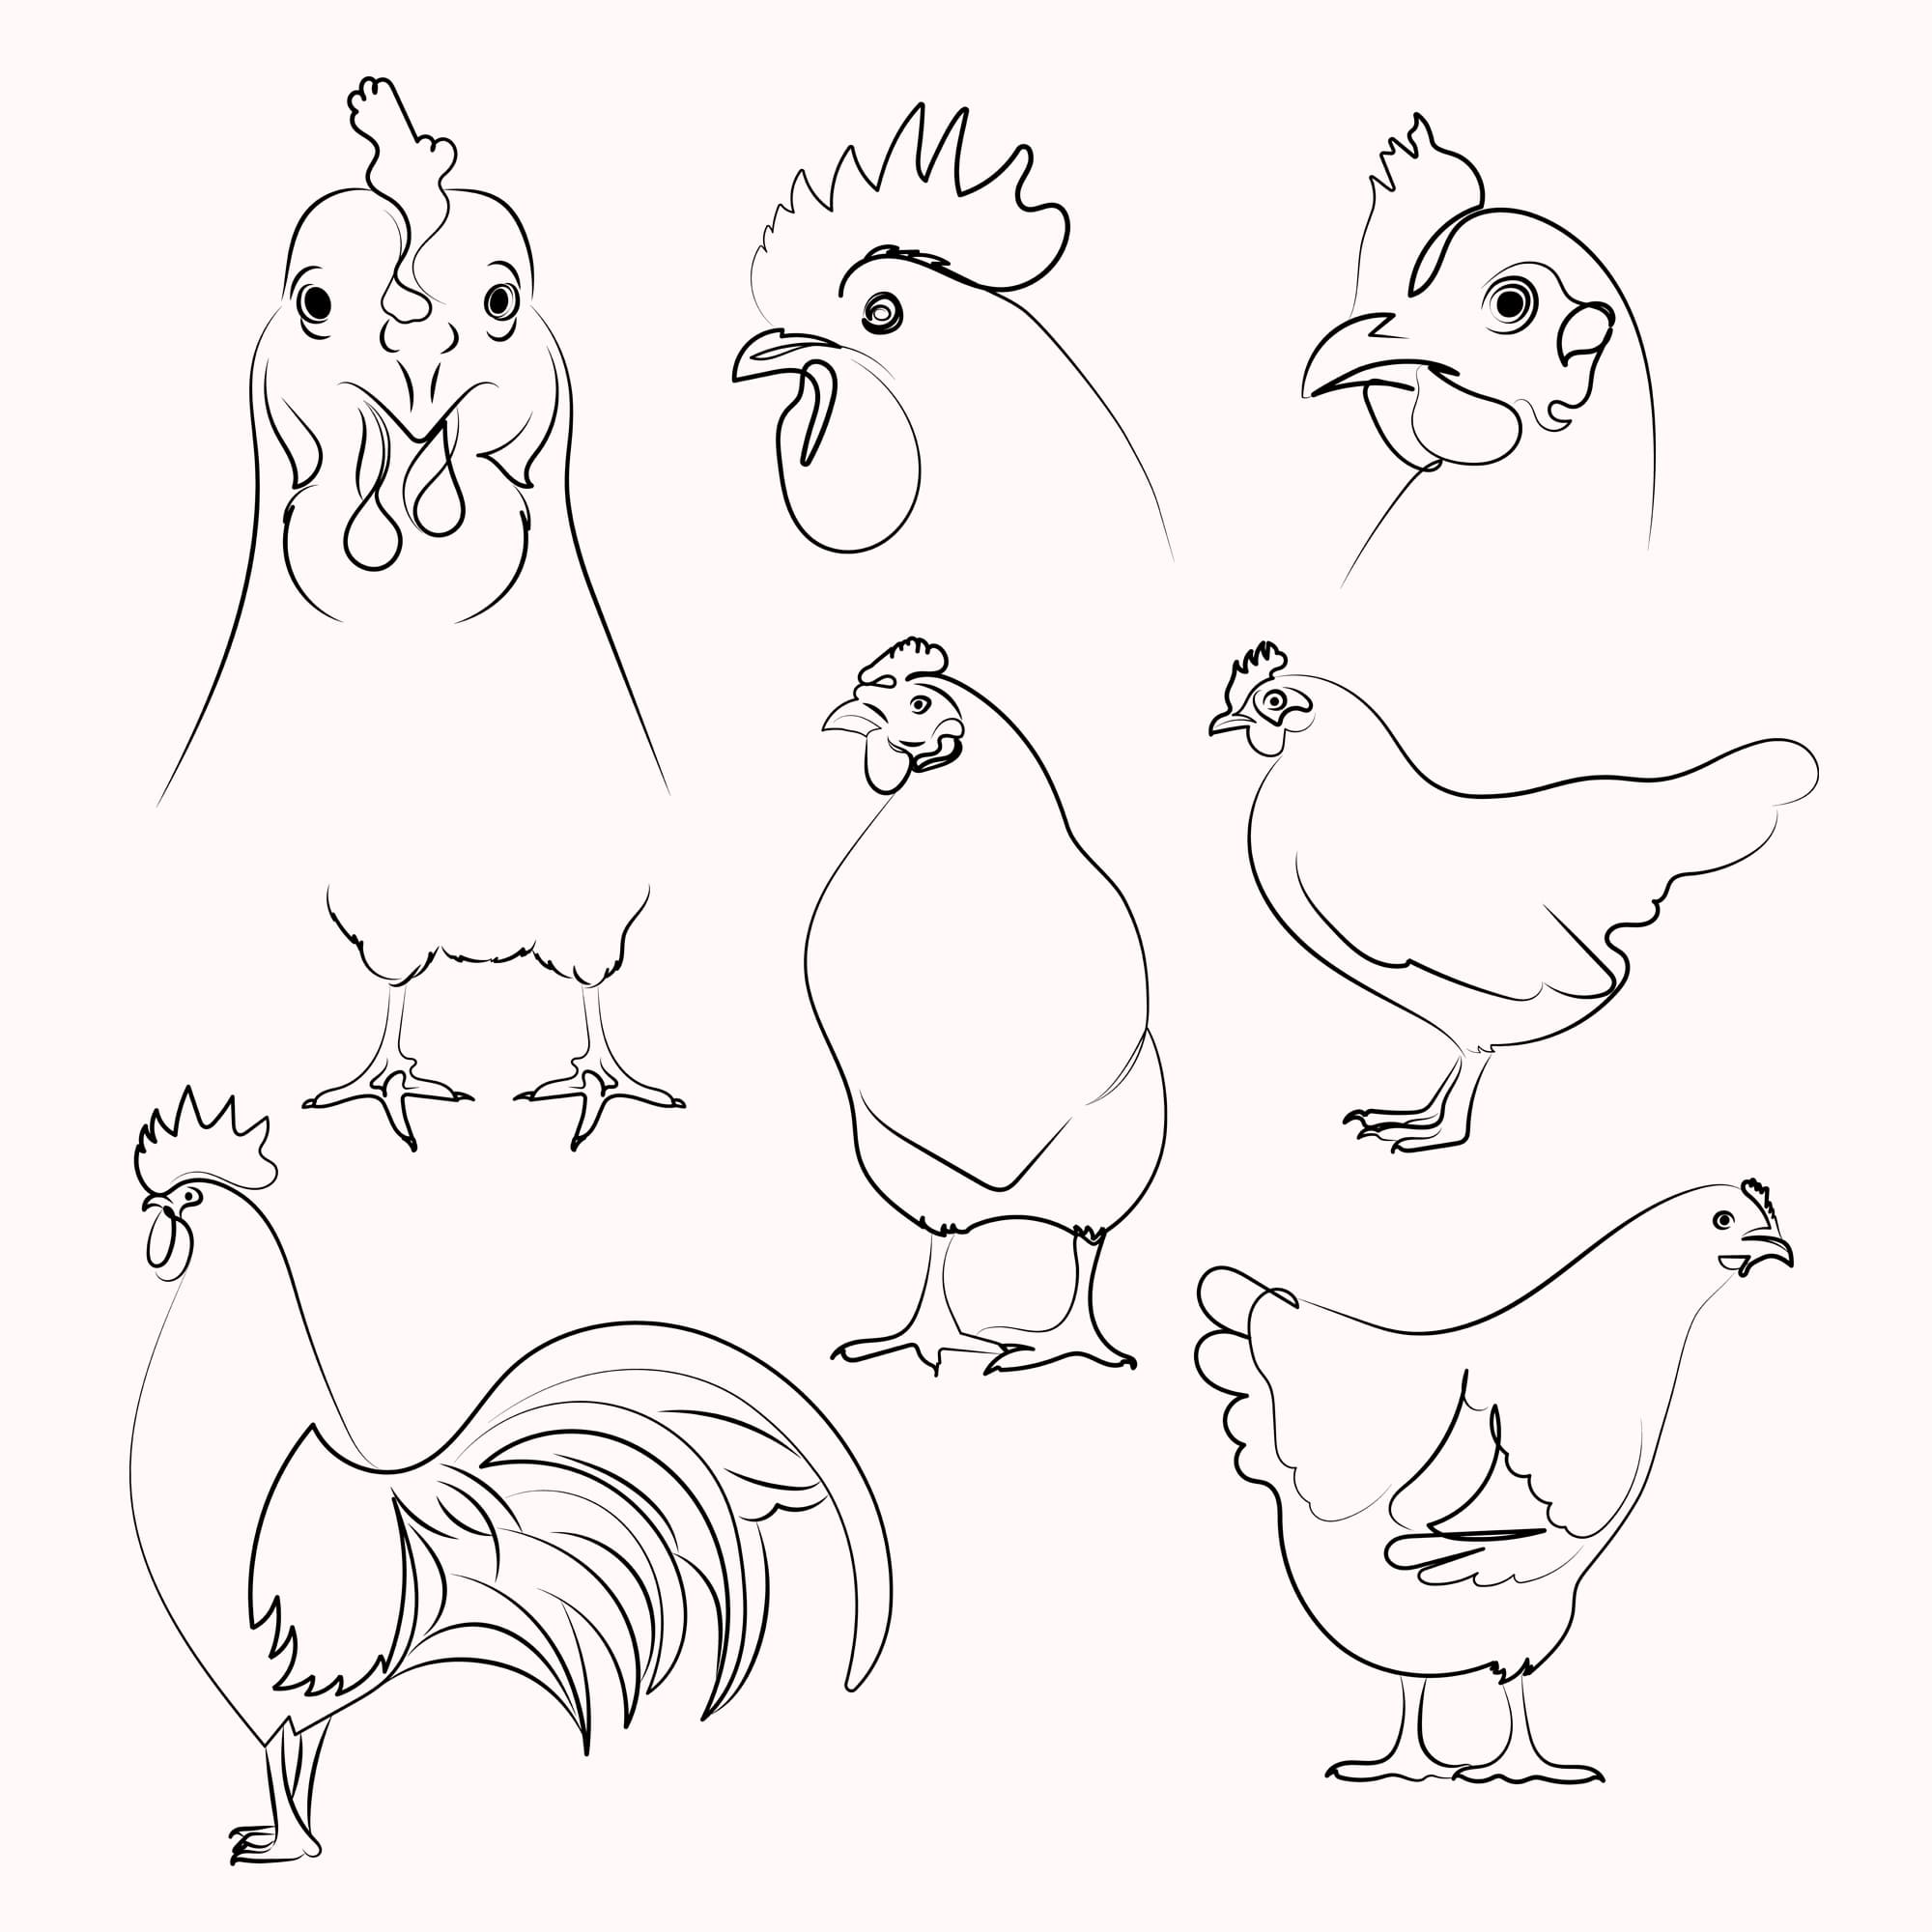 Bunch of chickens that are standing together.